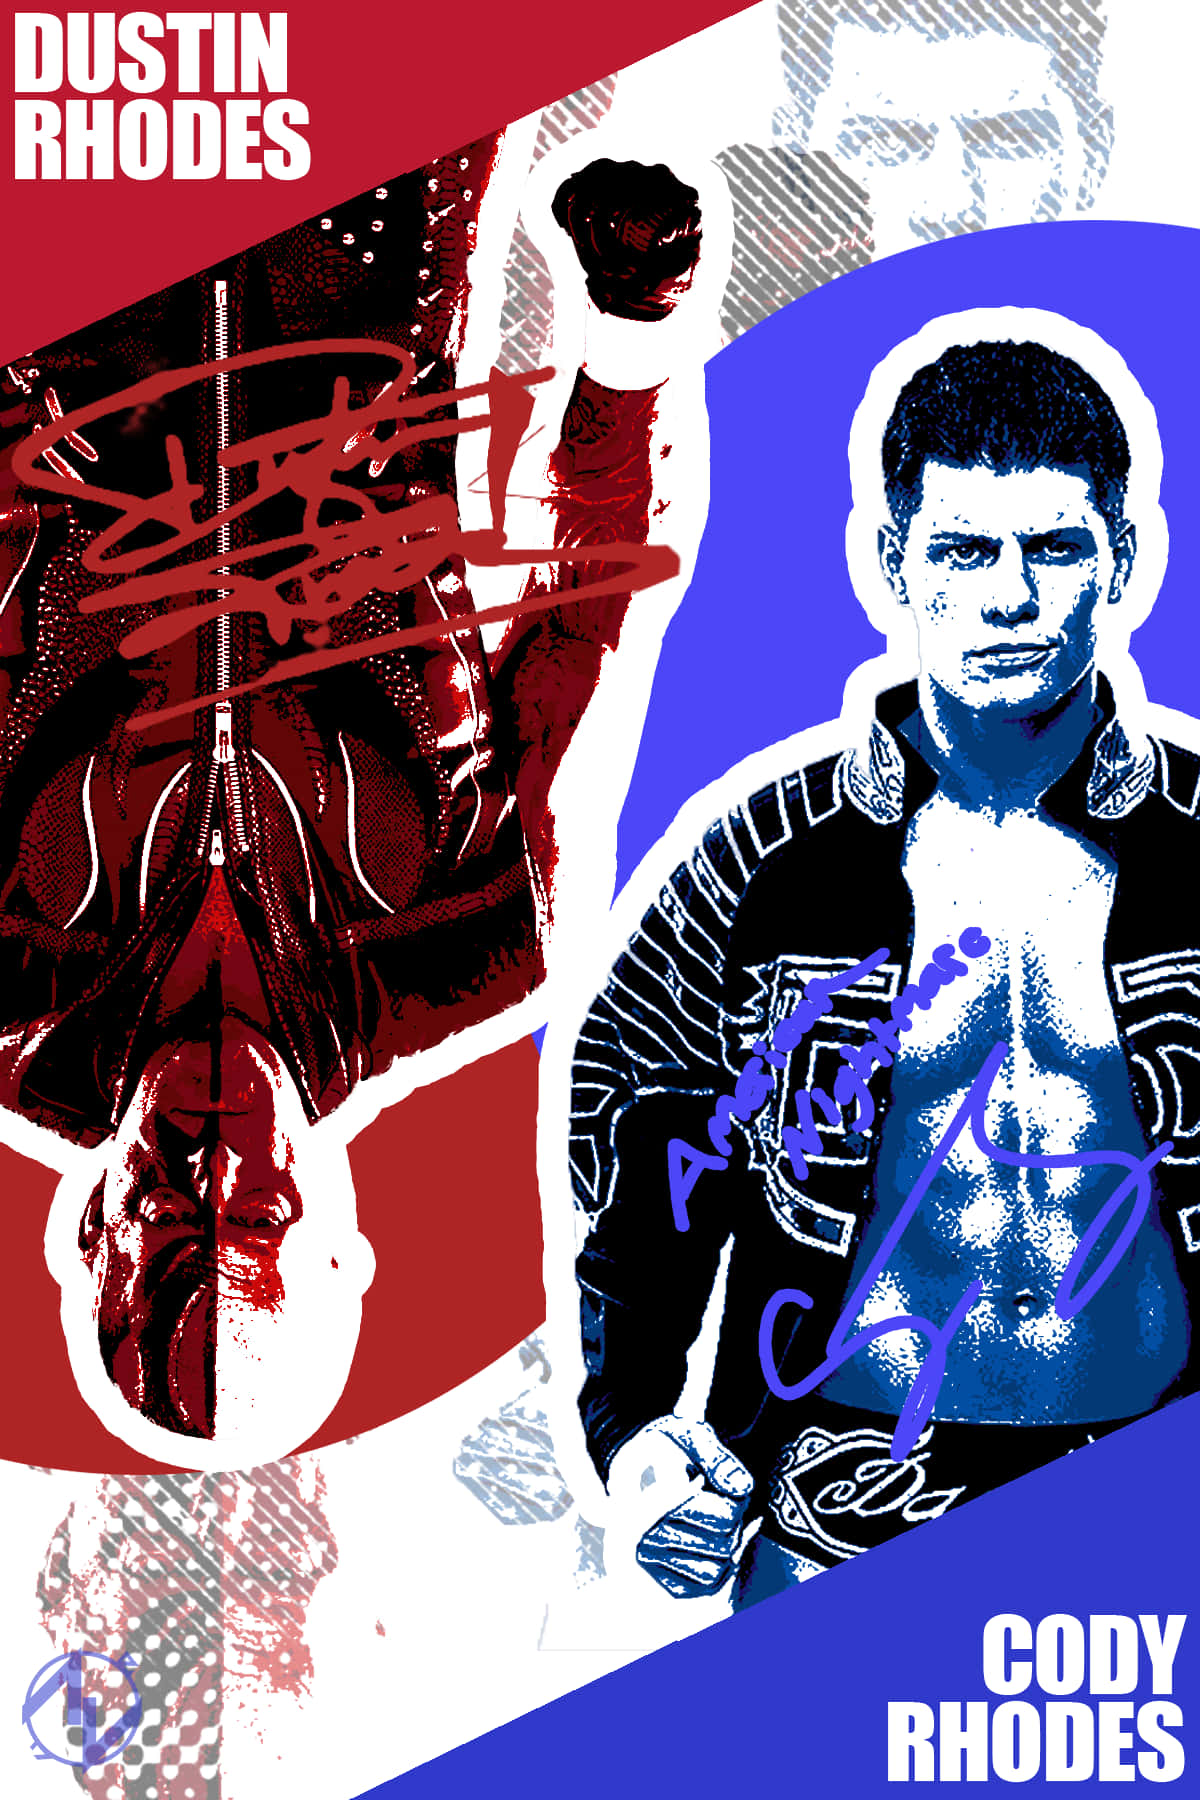 Wrestling Legends - Cody Rhodes and Dustin Rhodes in the Ring Wallpaper